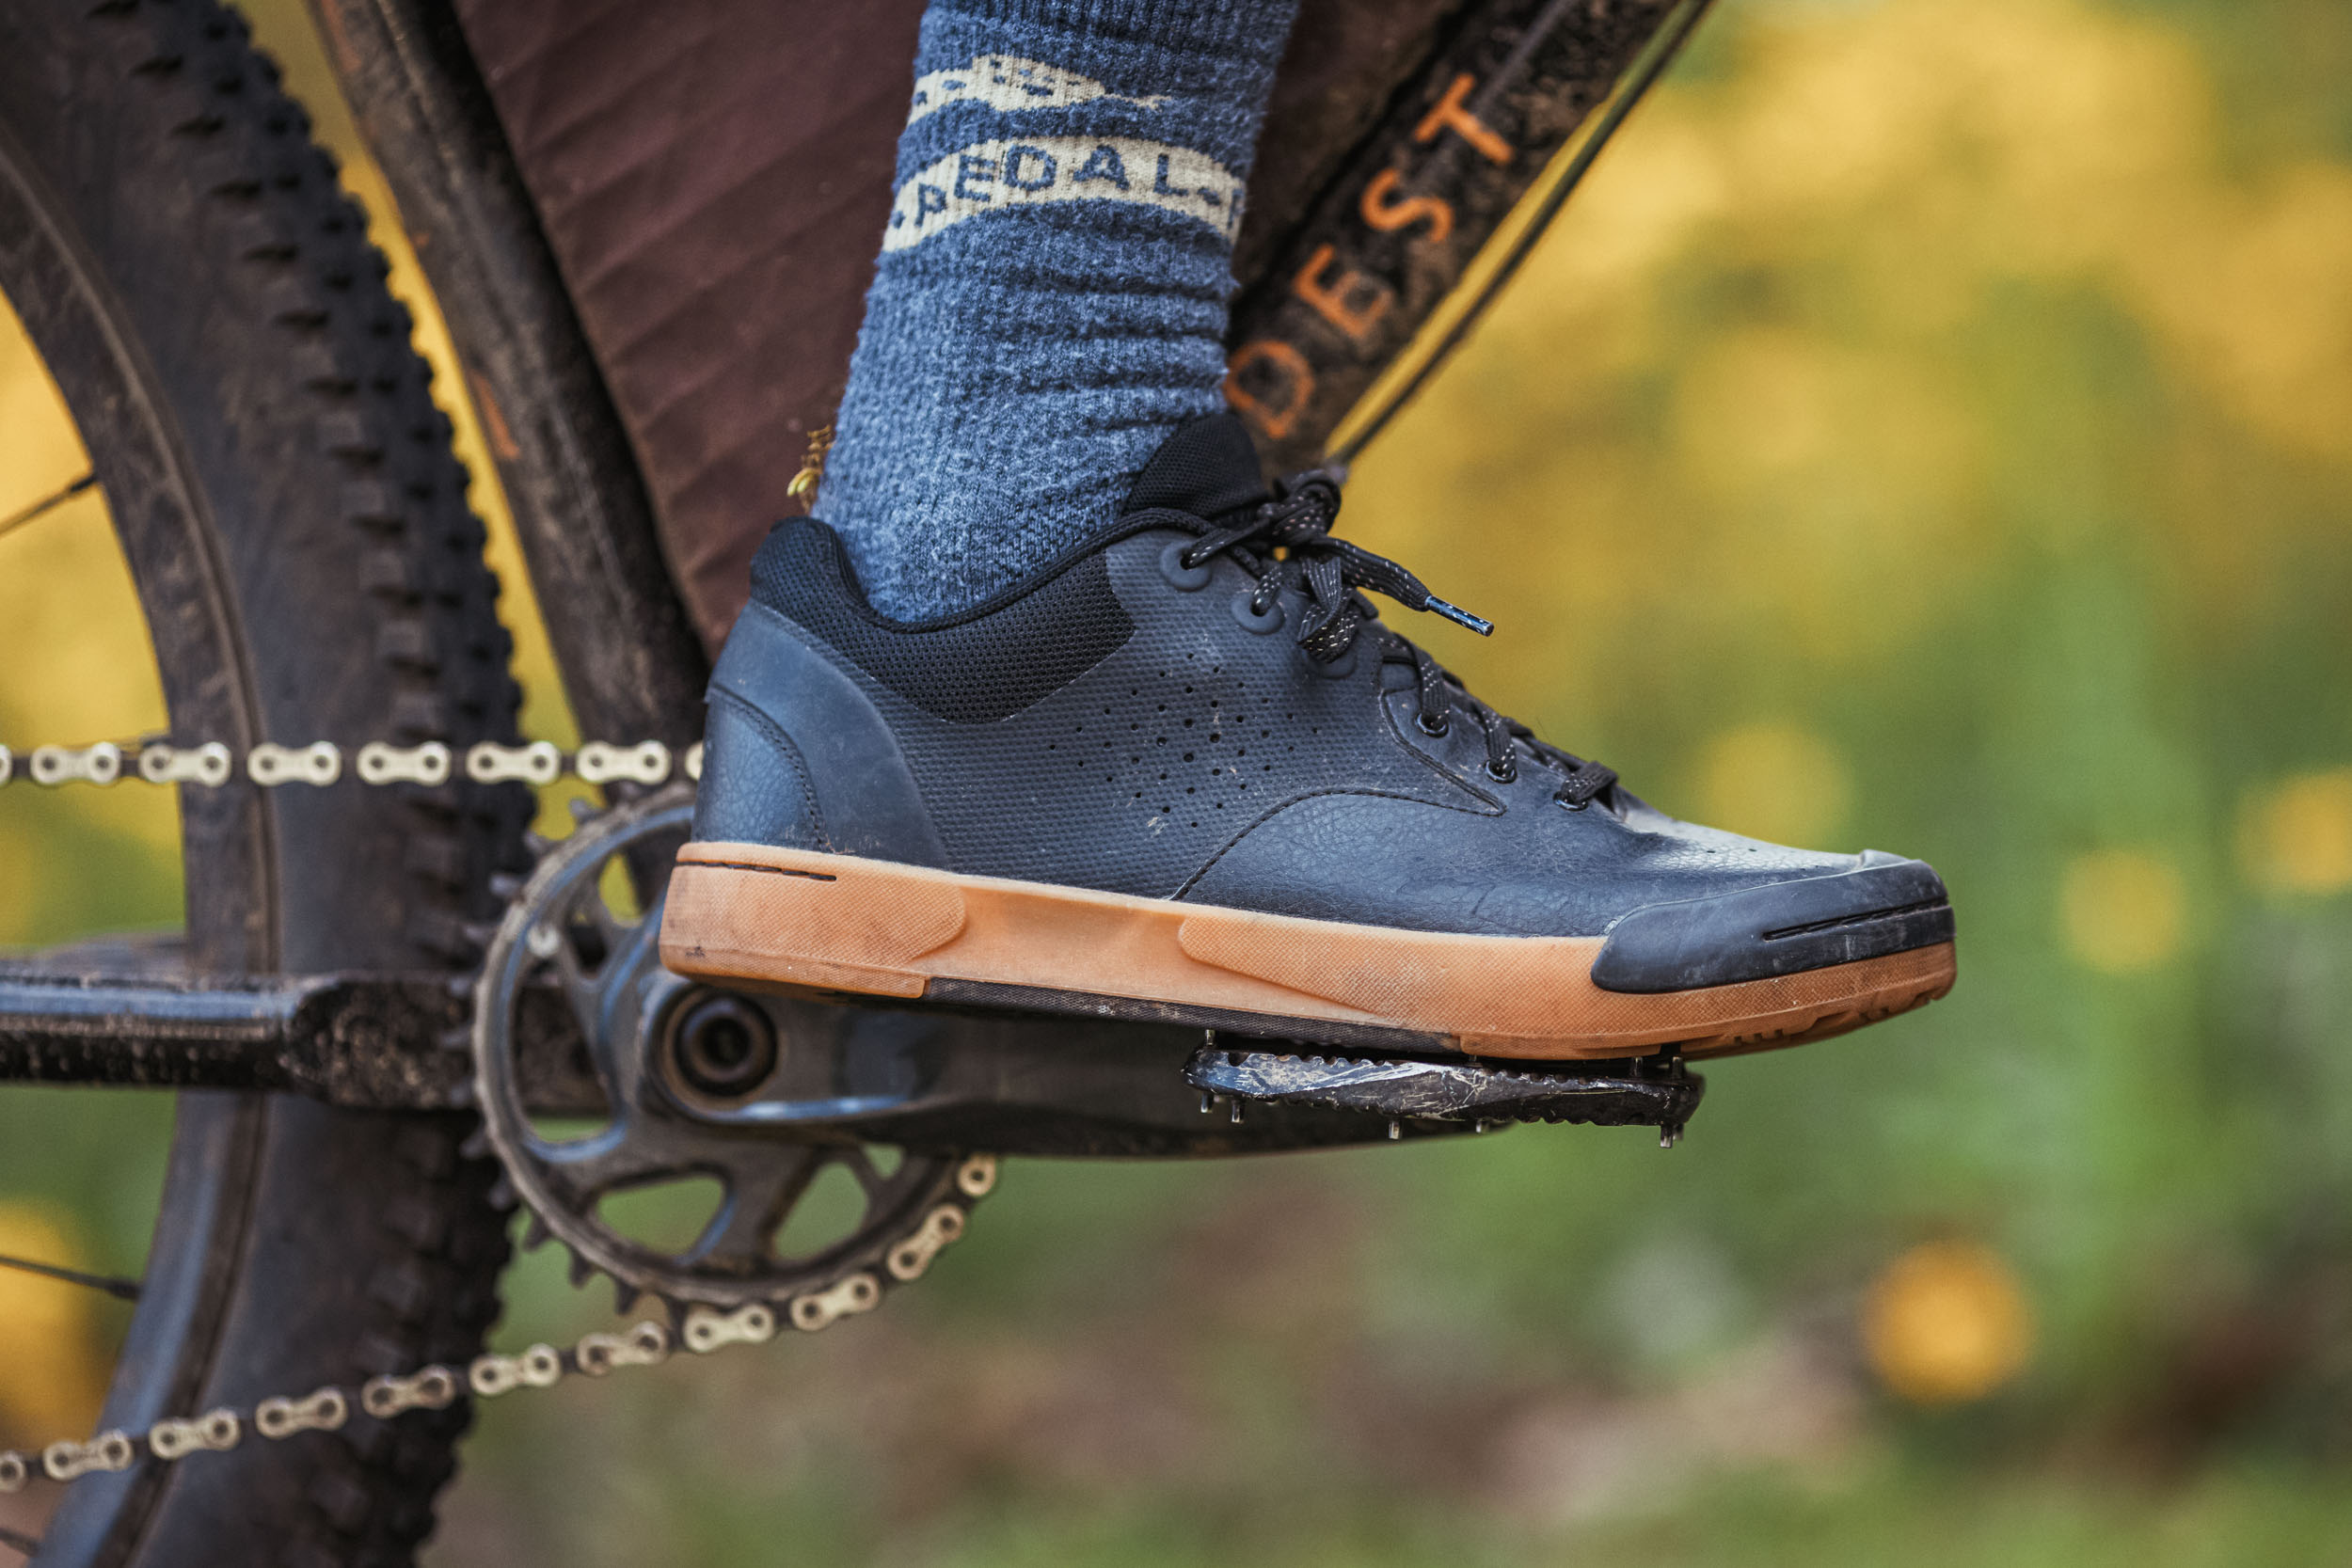 The Best Flat Pedal Mountain Bike Shoes of 2021 - BIKEPEPACKING.com نمبر وان